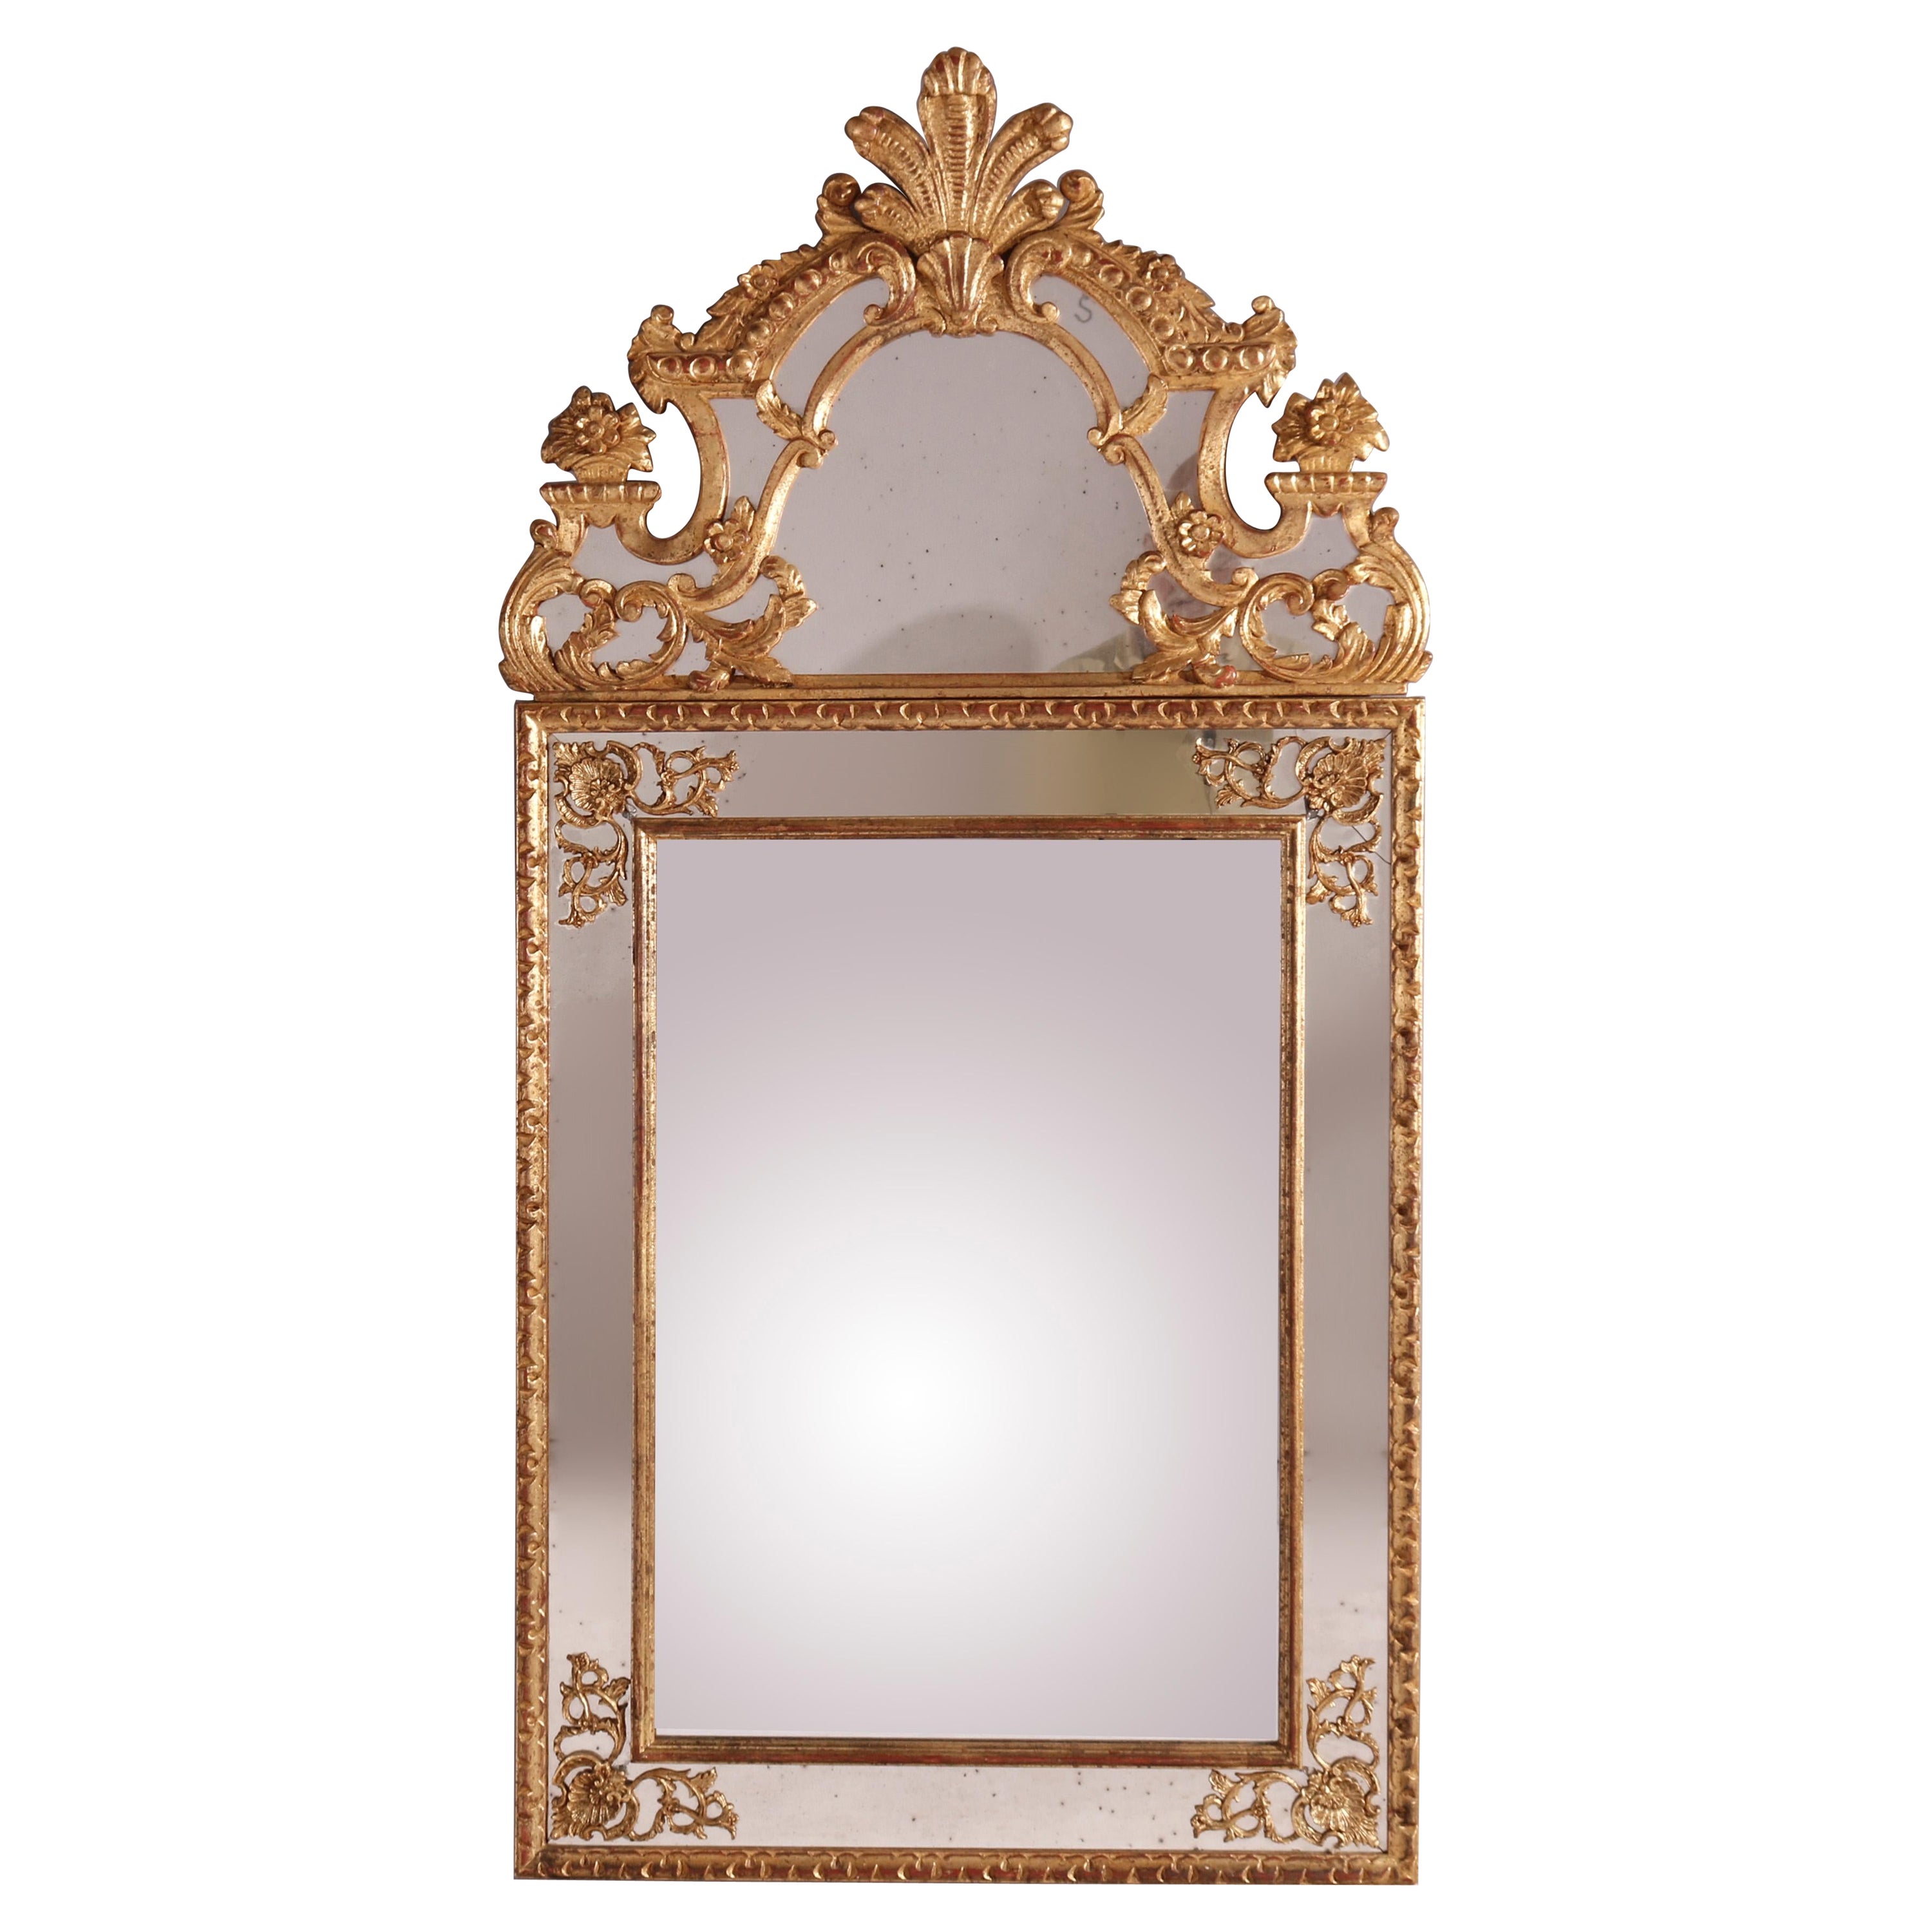 Large Italian Giltwood Parclose Wall over Mantel Mirror, 20th Century For Sale